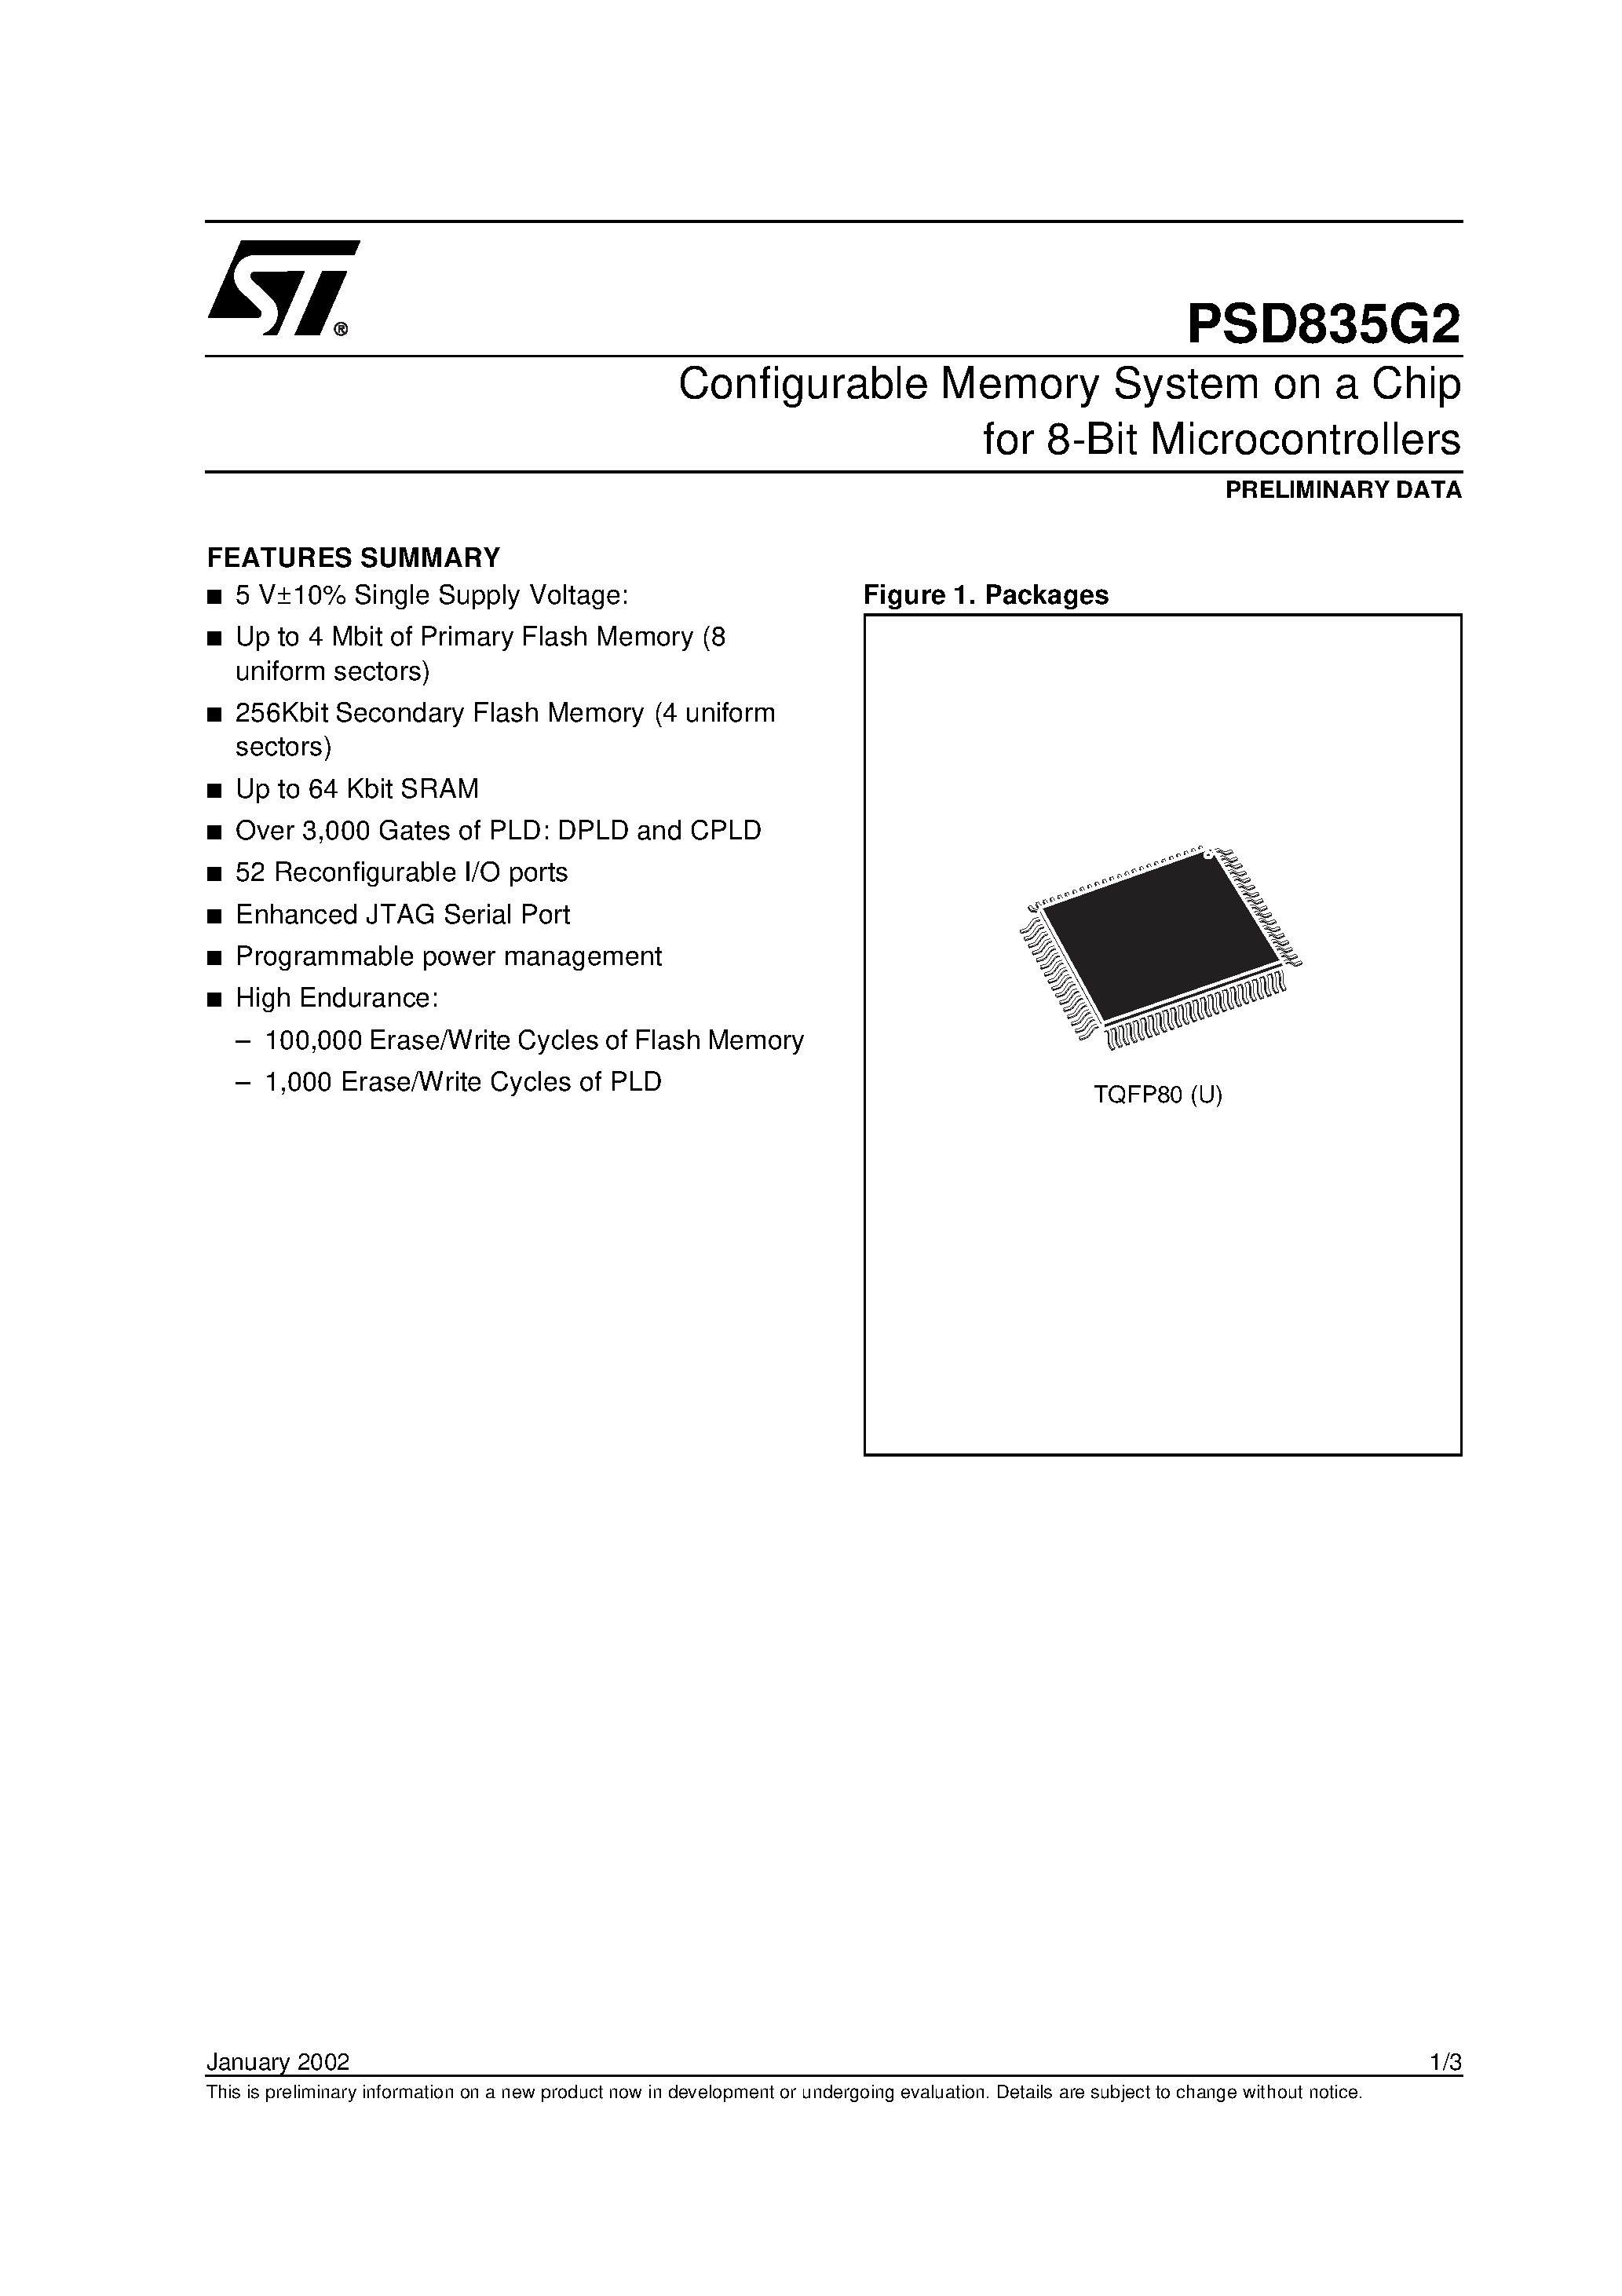 Datasheet PSD835F2V-A-20JI - Configurable Memory System on a Chip for 8-Bit Microcontrollers page 1